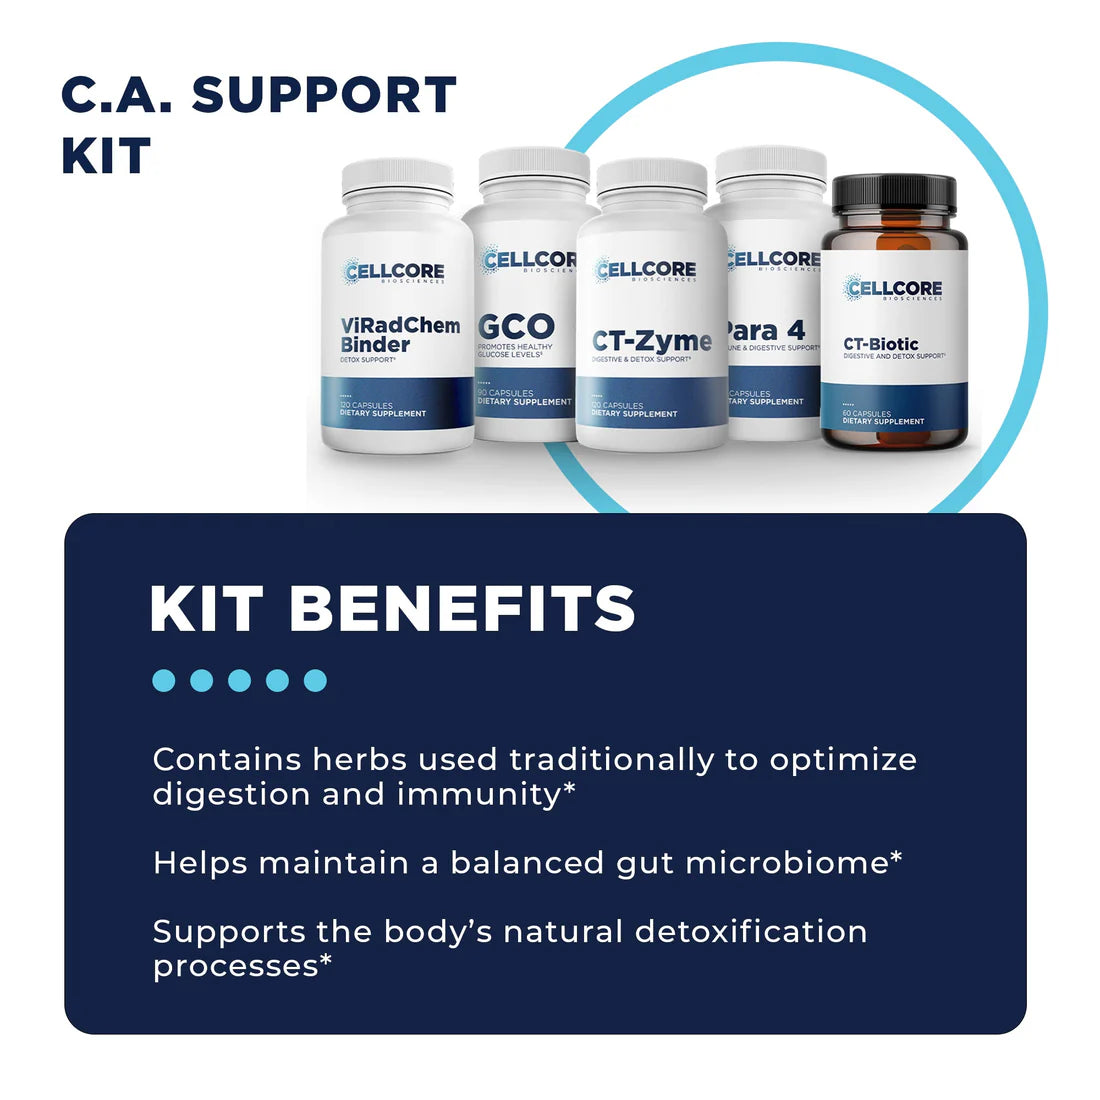 C.A Support Protocol